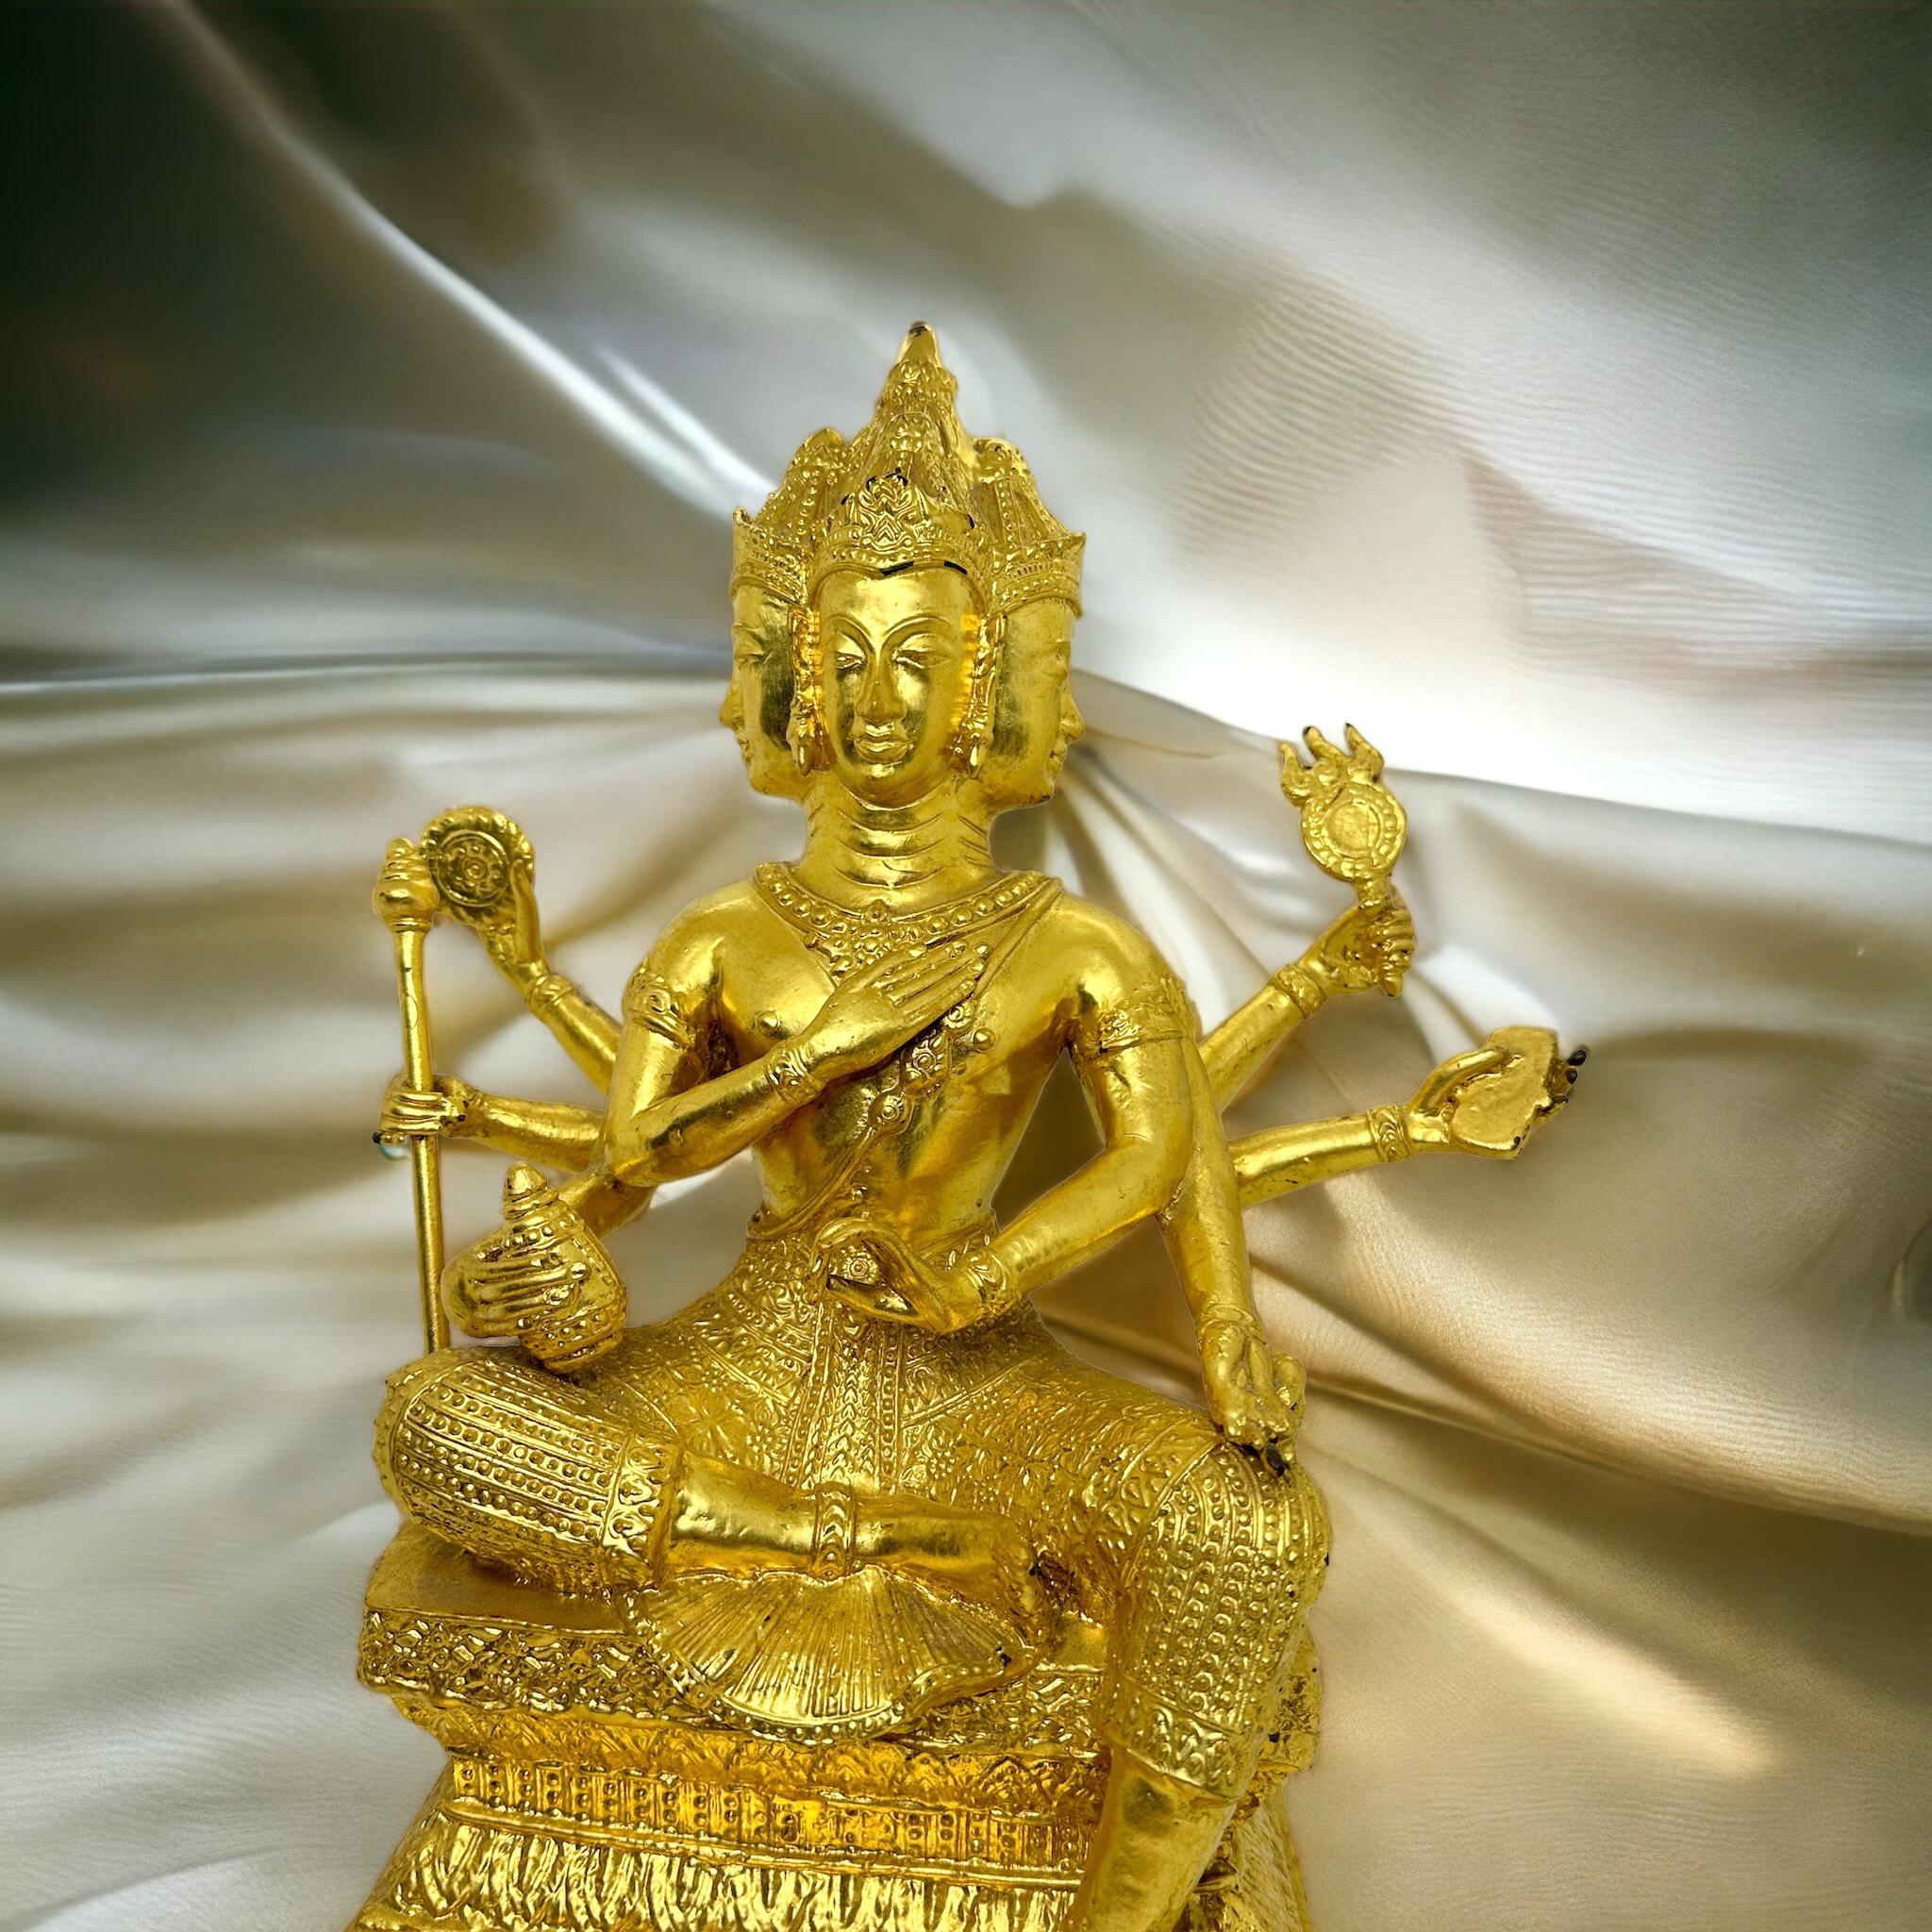 A decorative handmade sculpture or statue. Showing Brahma, the first of the three Hindu trinity, he is the creator of the universe. He is depicted with four faces looking at the four cardinal directions. Brahma is the first god in the Hindu